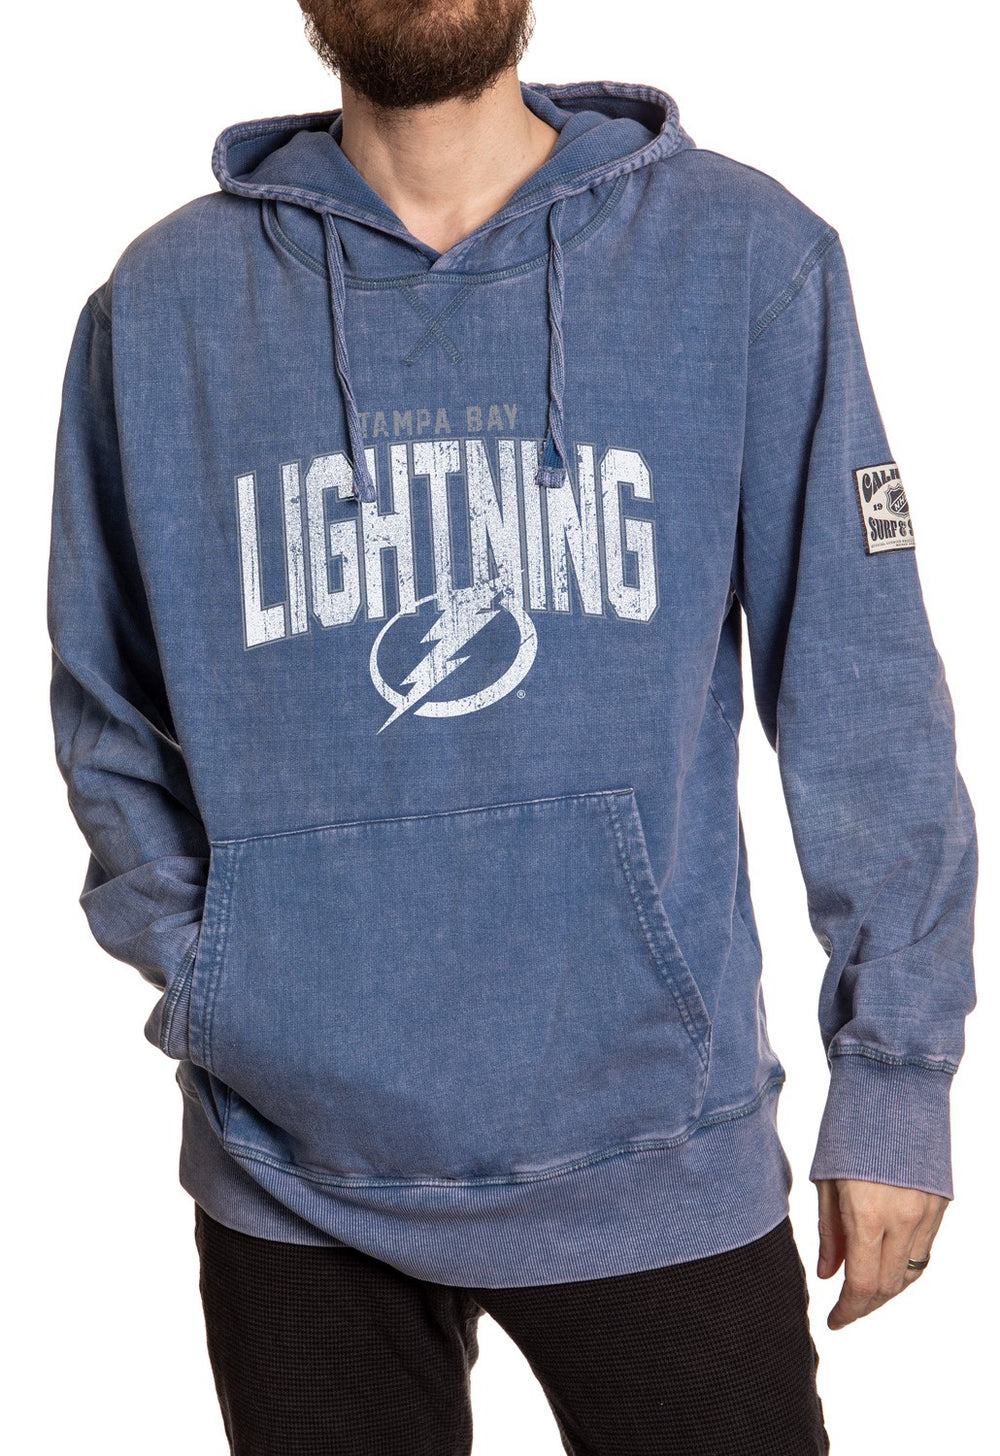 Tampa Bay Lightning Sportiqe Waffle Knit Thermal Hoodie Long Sleeve Gray / L